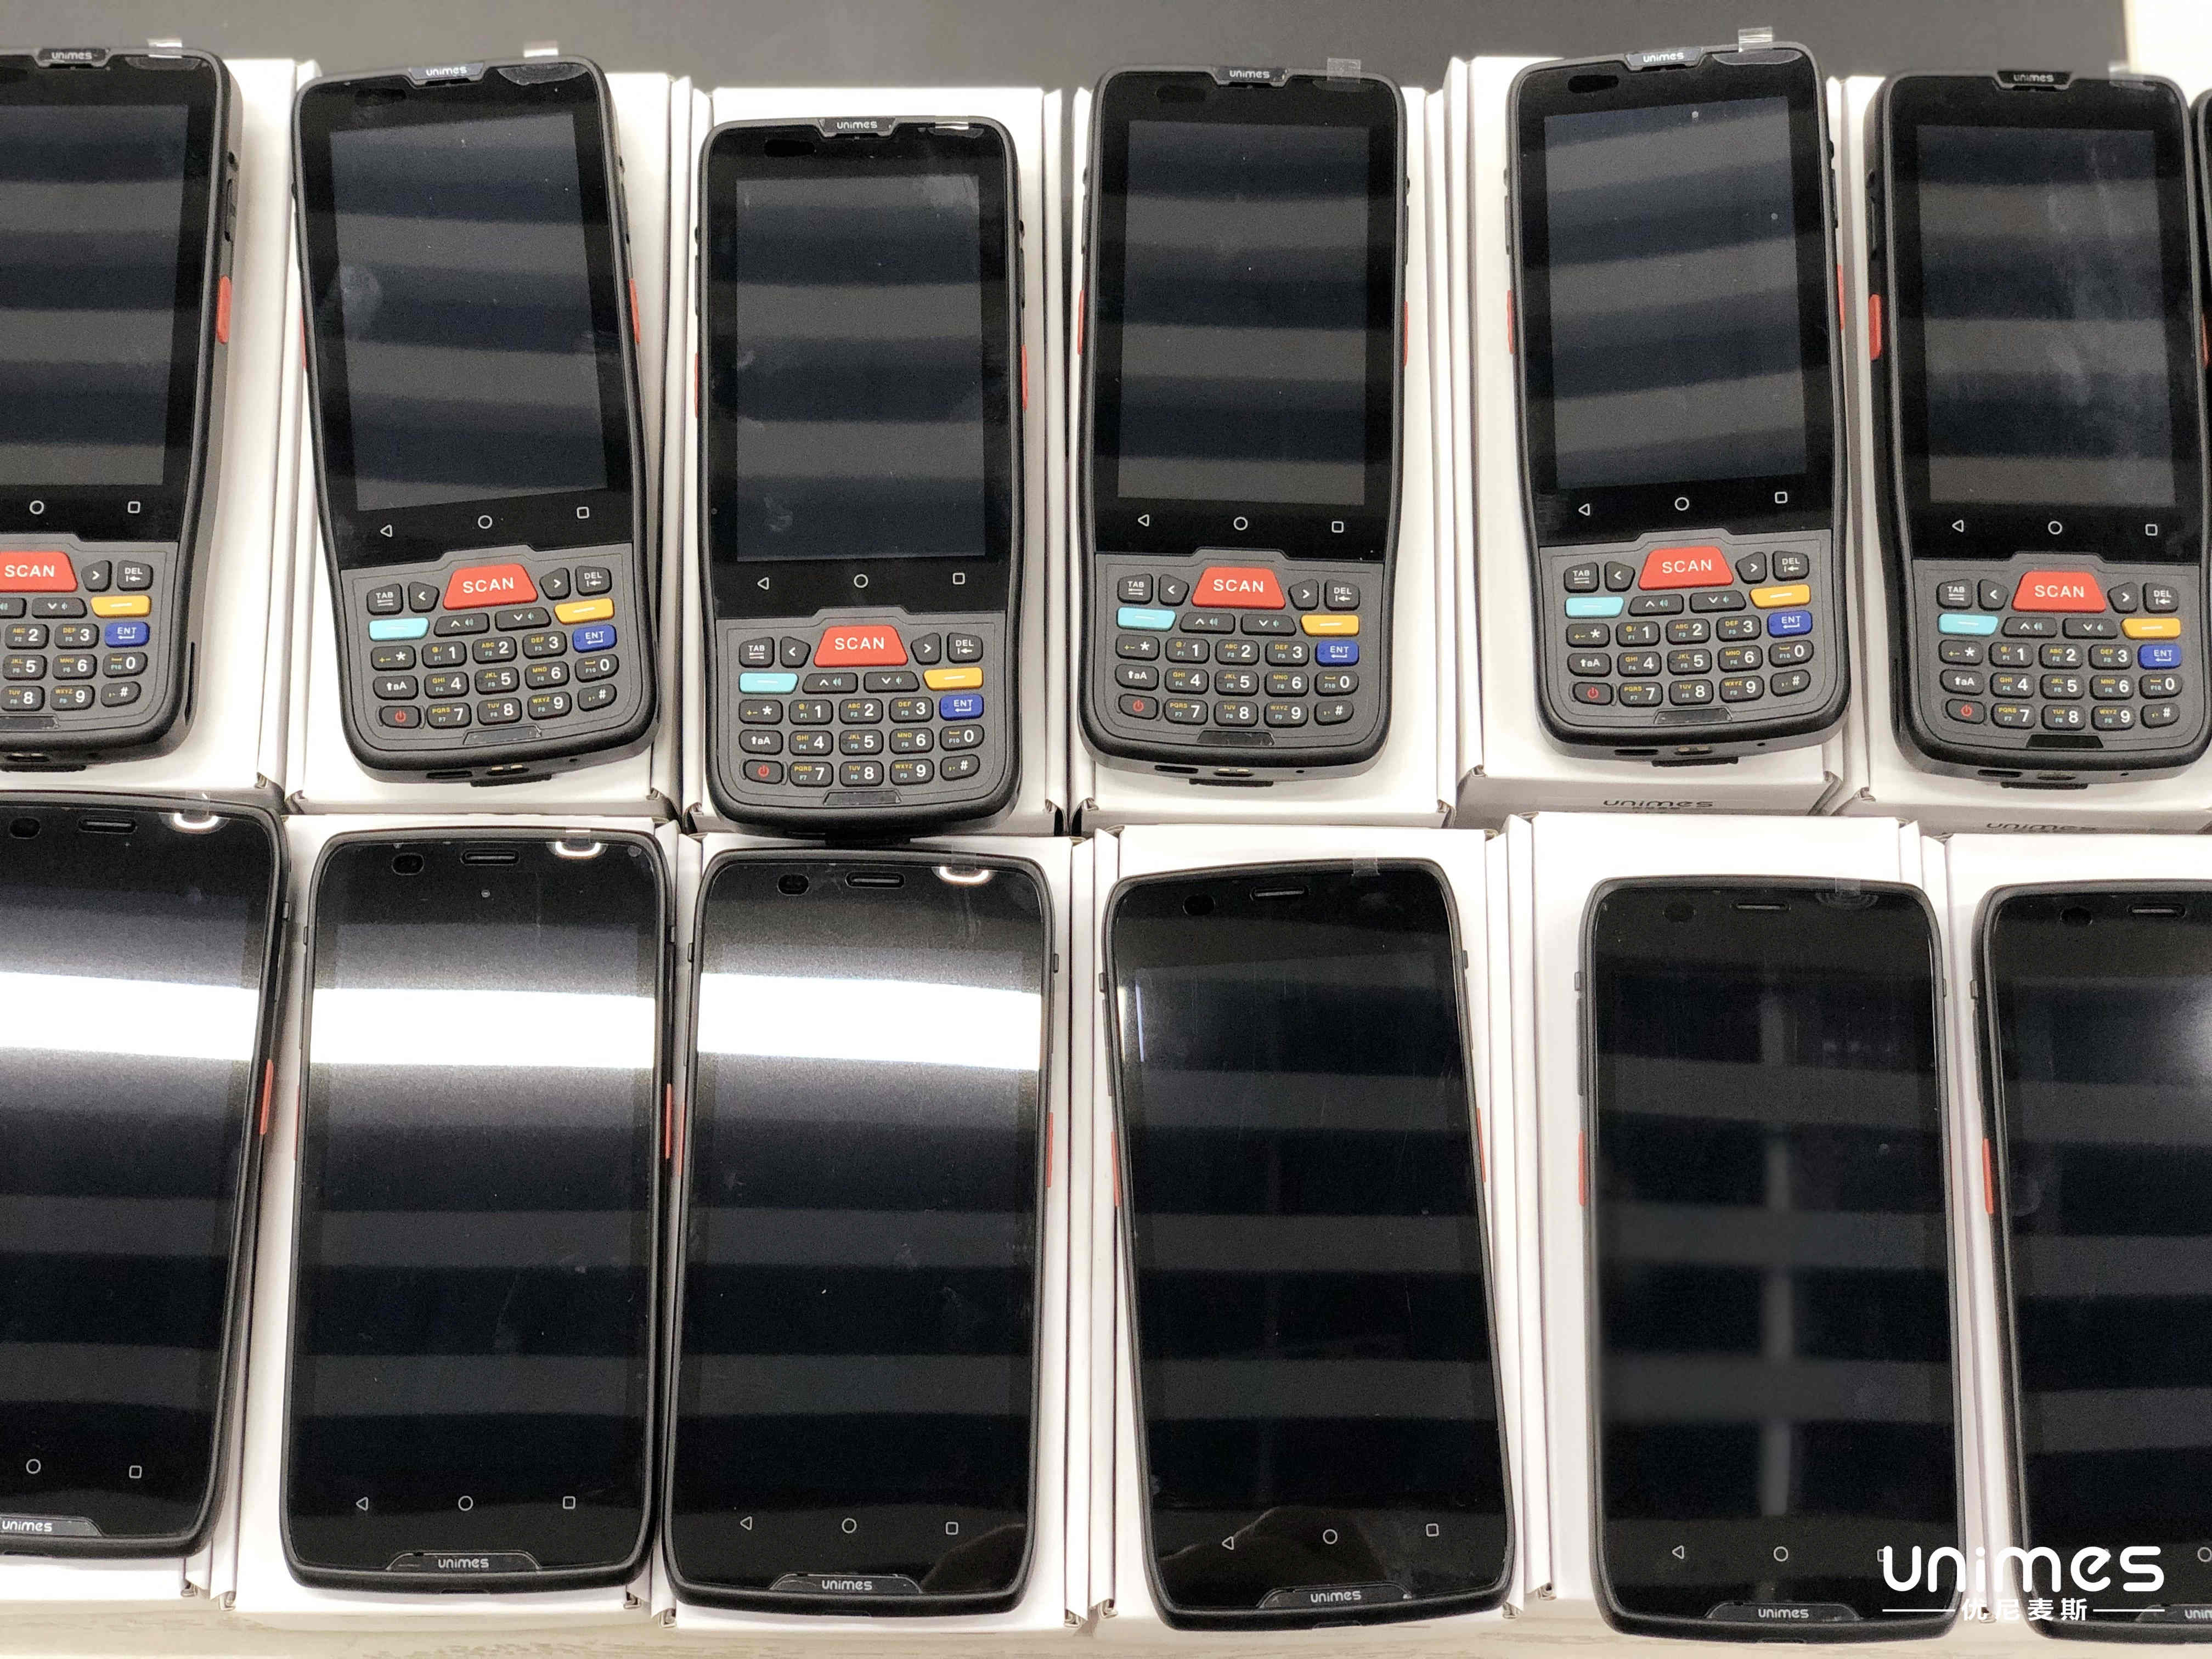 Unimes' PDAs are a hit in South East Asia